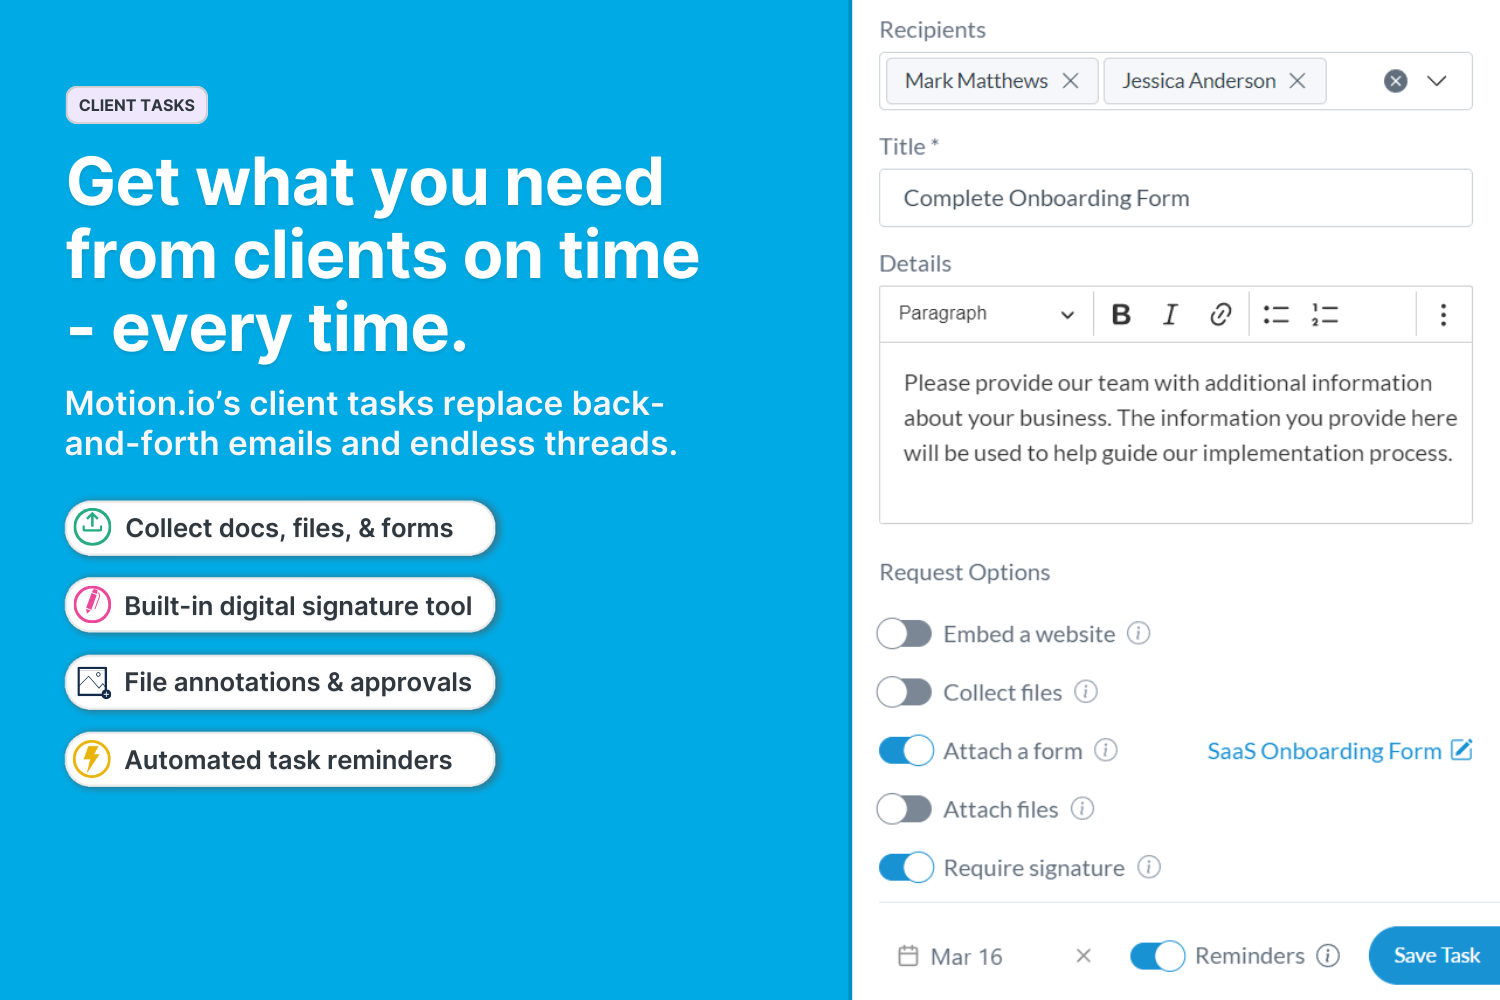 Motion.io's client tasks empower your team to spend less time chasing clients and more time delighting them by automating the collection of files, signatures, feedback, and forms.